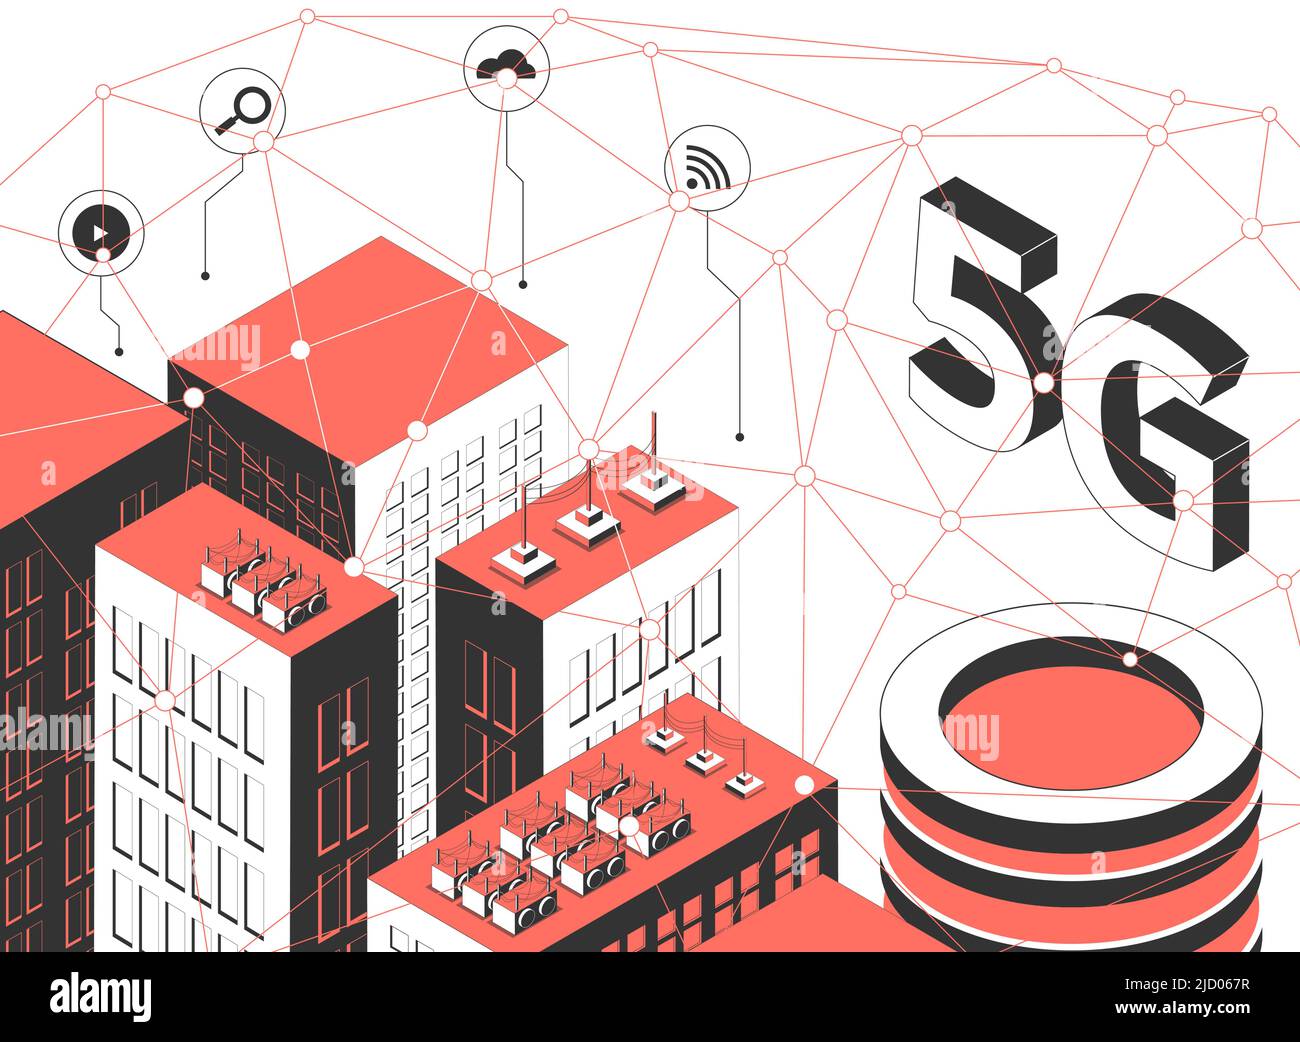 5G wireless technology isometric composition with city block tall buildings images round pictogram icons and net vector illustration Stock Vector